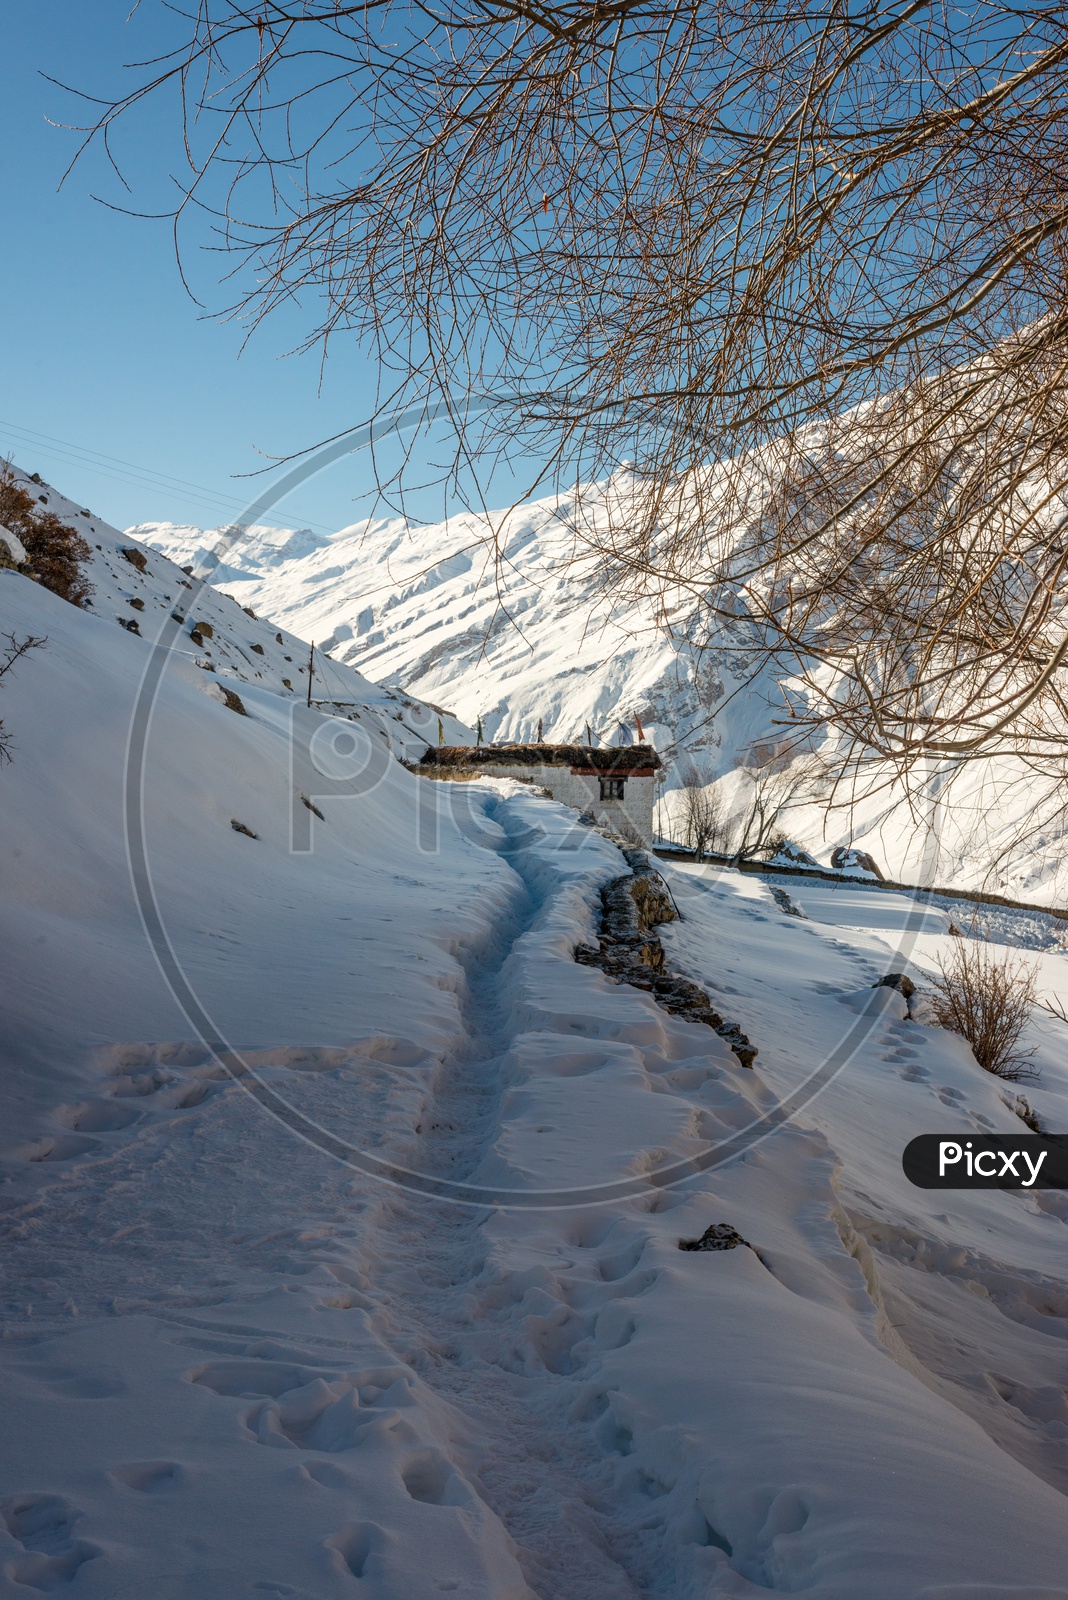 Trekking Pathway in Snow with Dry Trees